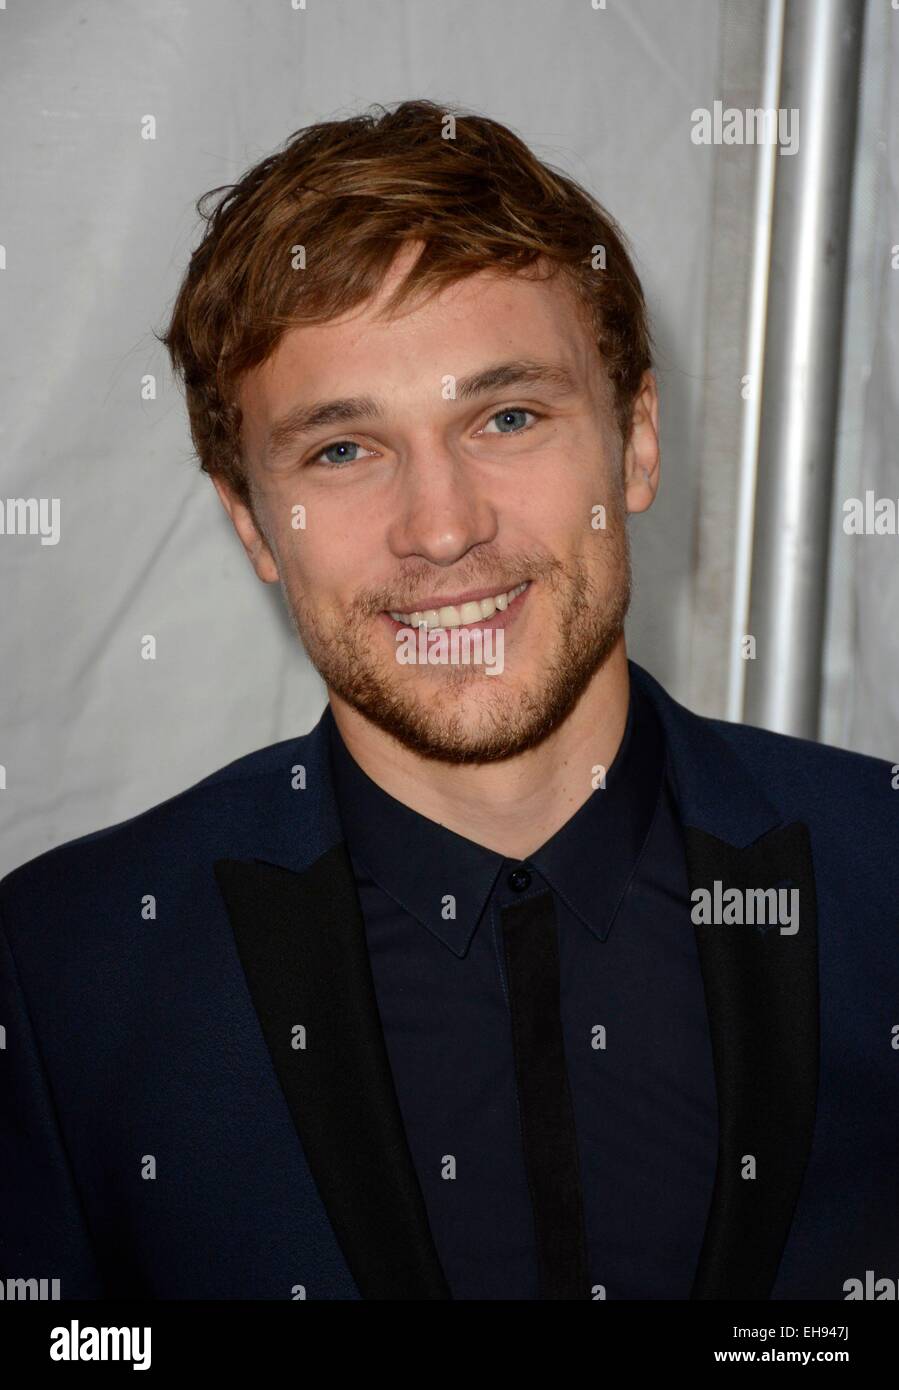 New York, NY, USA. 9th Mar, 2015. William Moseley at arrivals for THE ROYALS Series Premiere on E!, The Top of The Standard, New York, NY March 9, 2015. Credit:  Derek Storm/Everett Collection/Alamy Live News Stock Photo